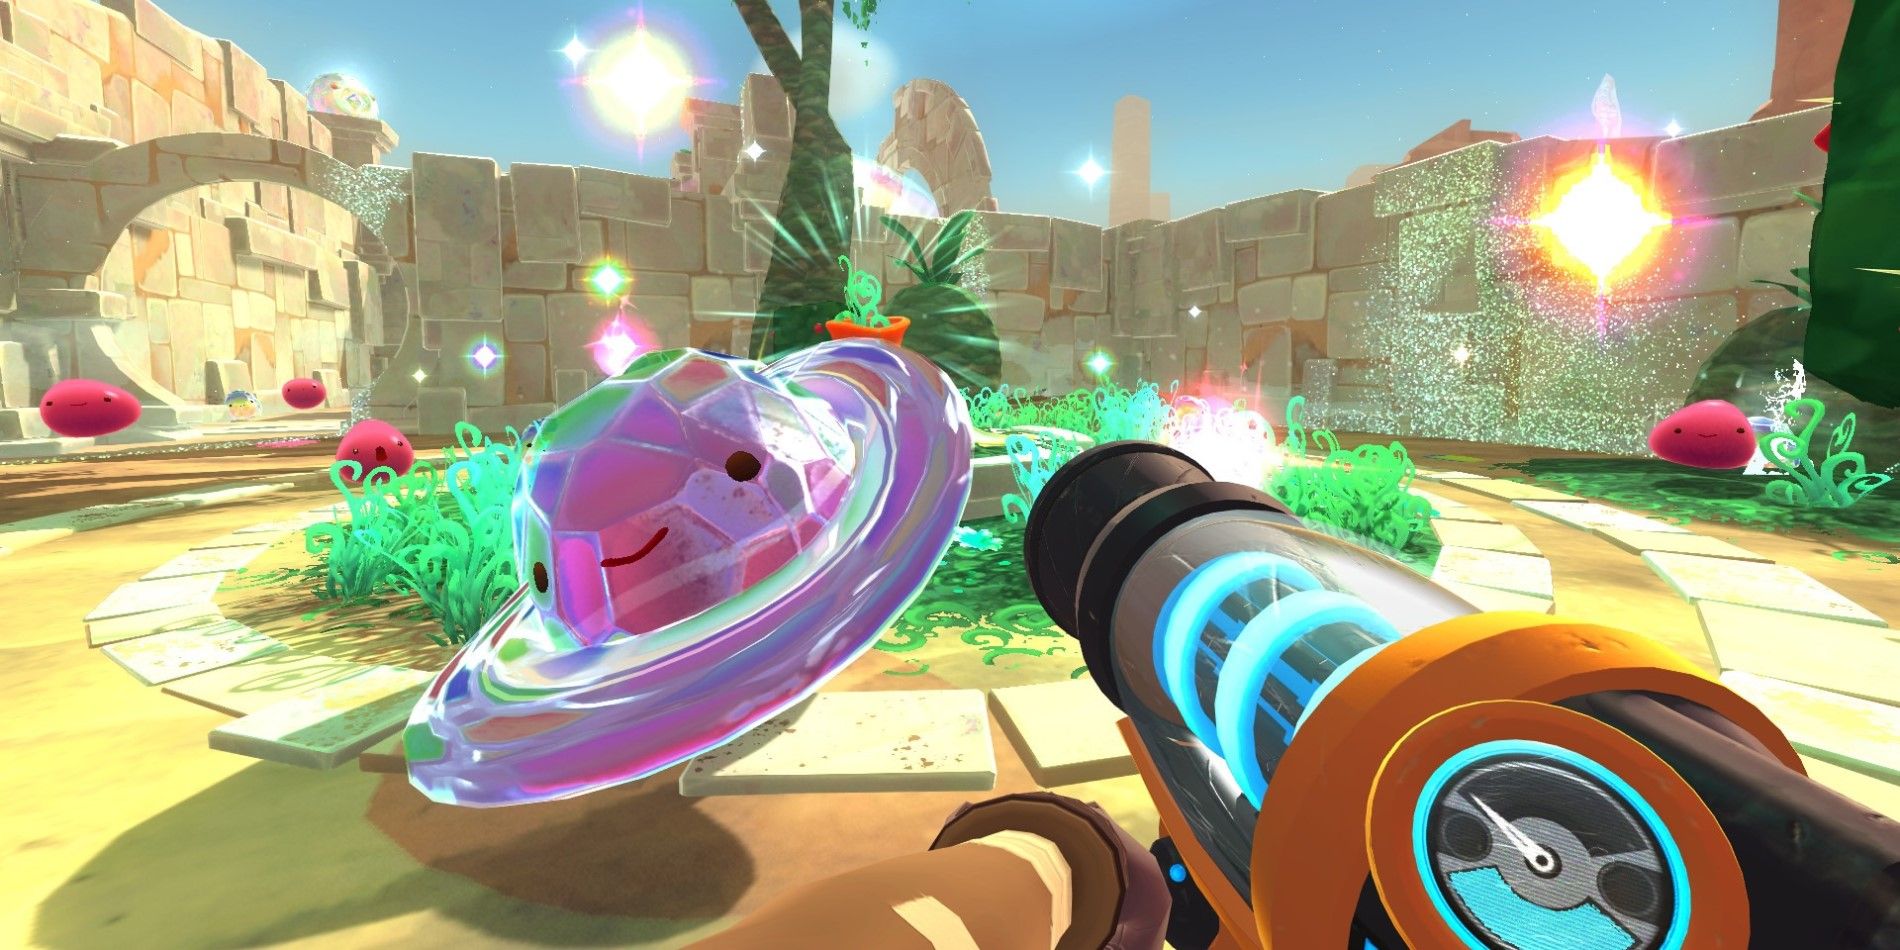 First person view of a character shooting at a glass desert in Slime Rancher